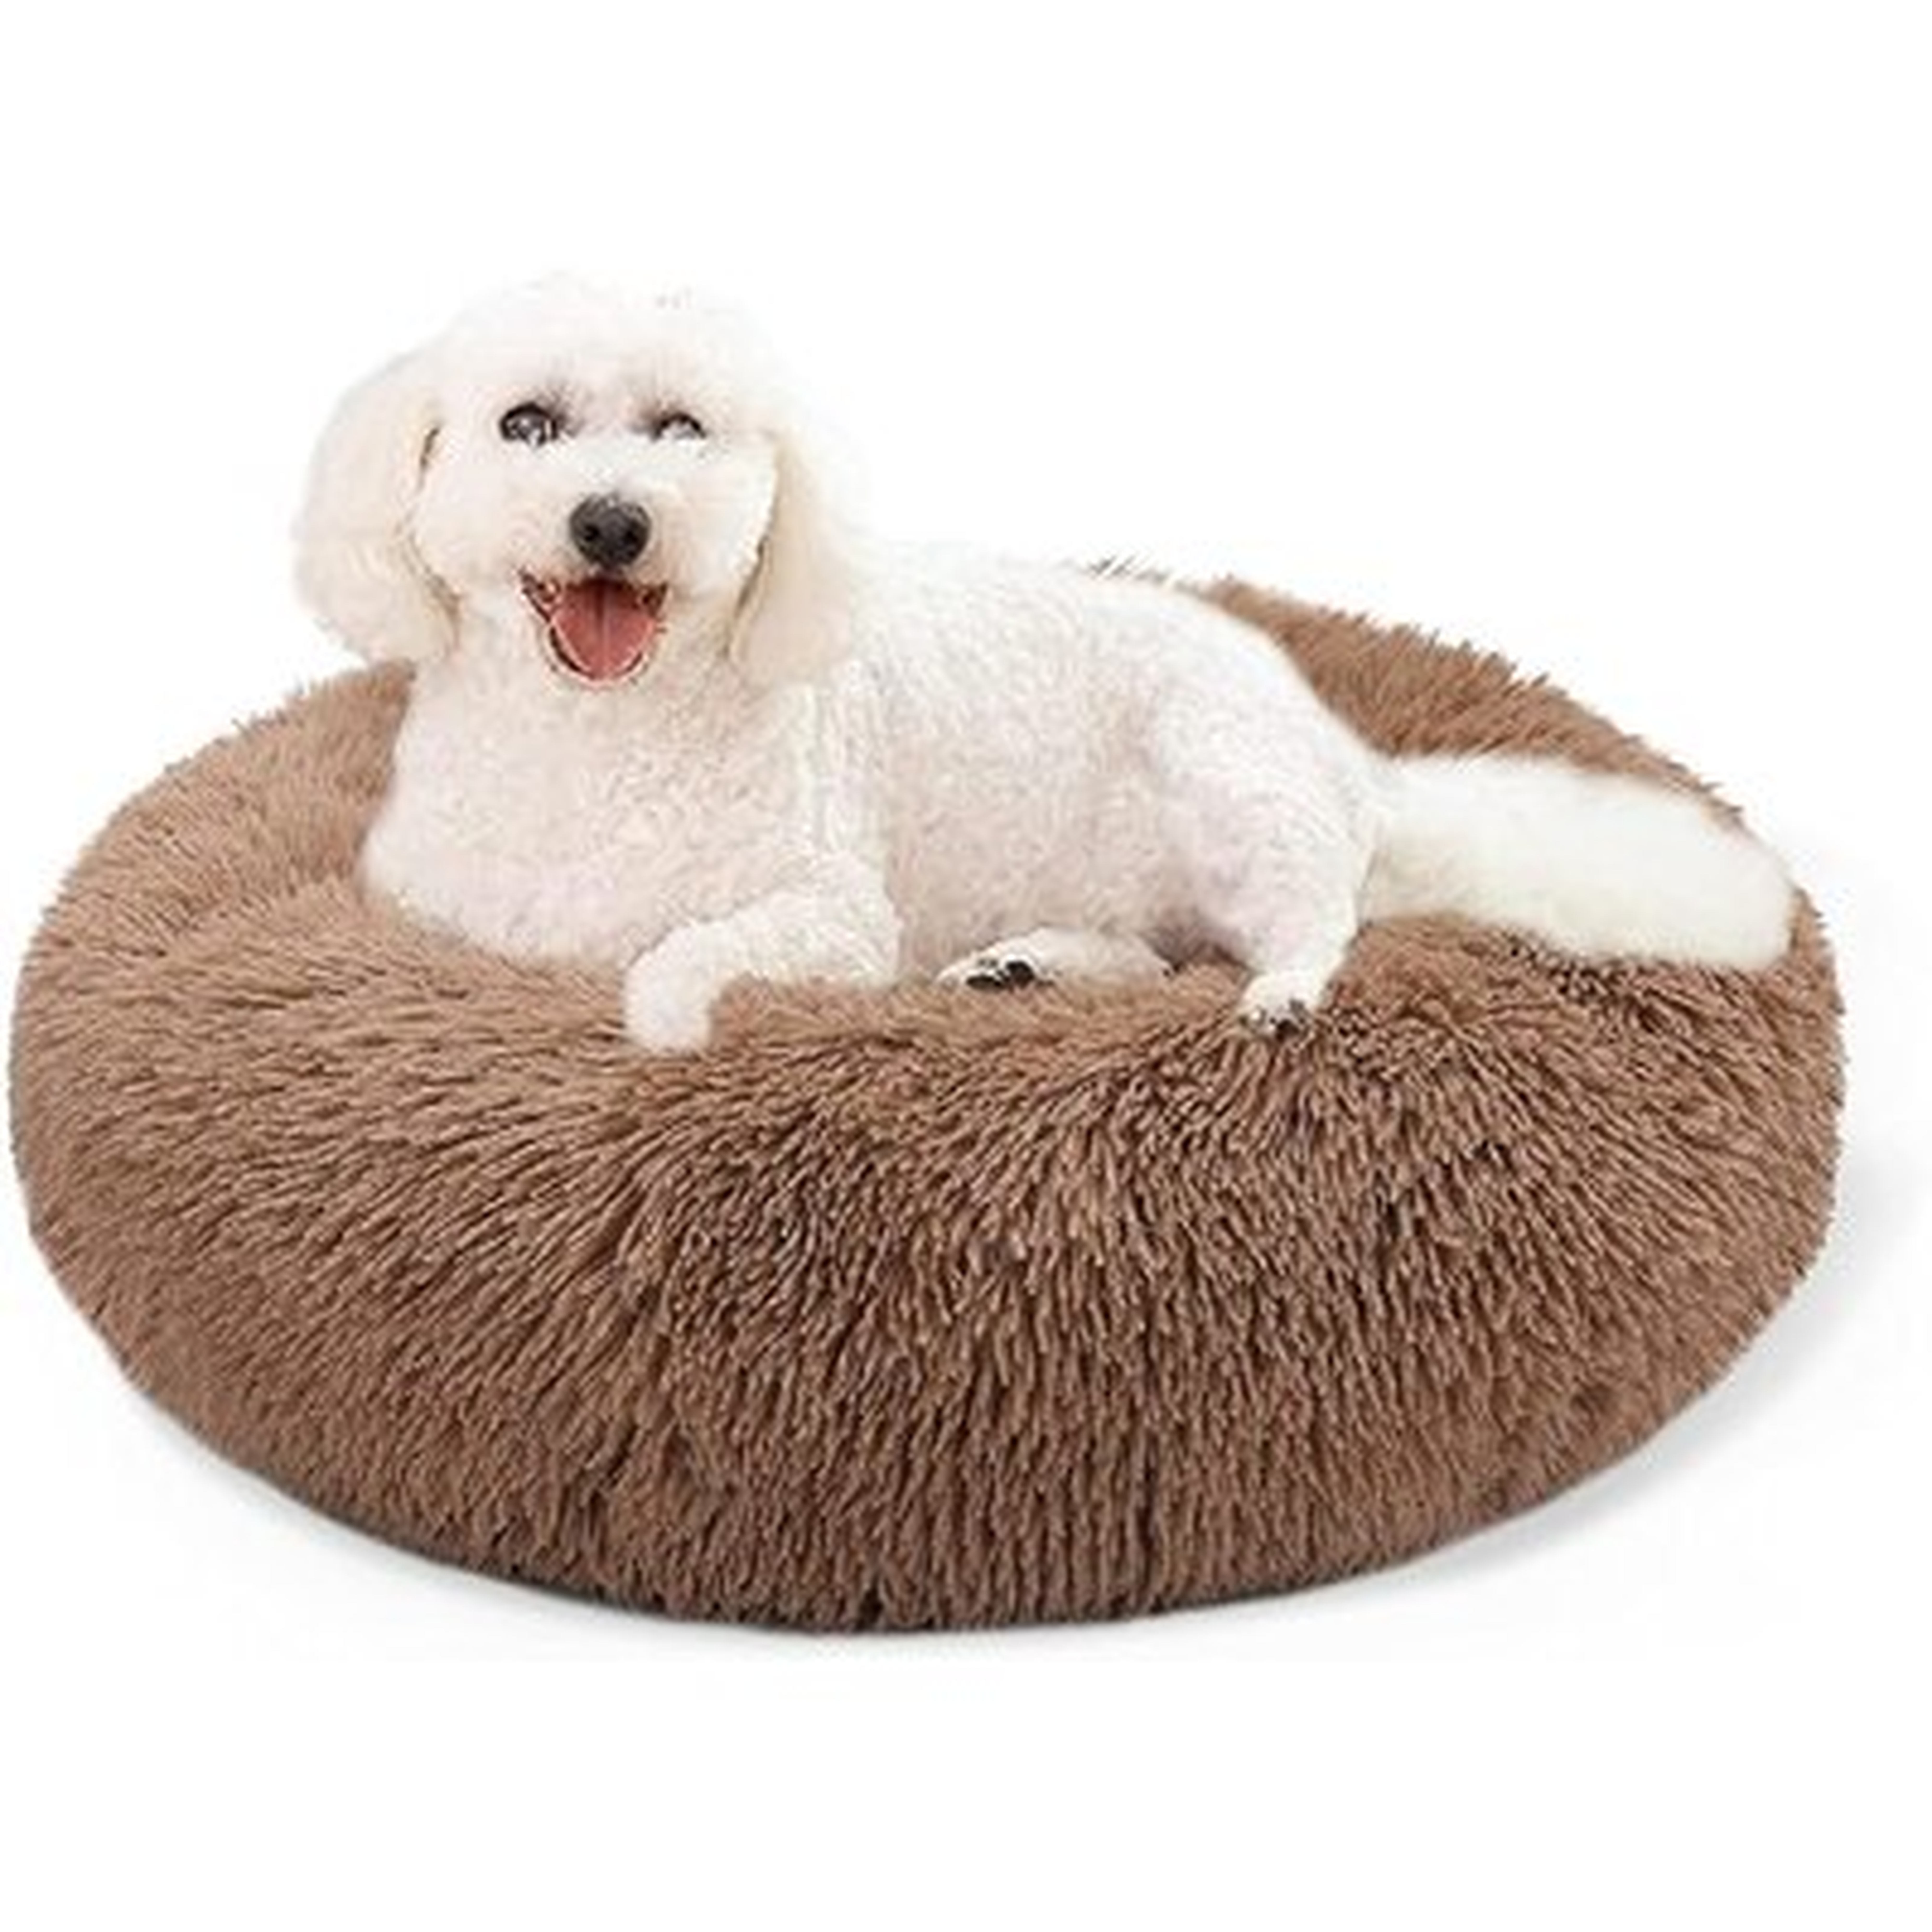 Extra Large Dog Bed Comfortable Donut Cuddler Round Dog Bed Anti-Slip Faux Fur Pet Bed Ultra Soft Pet Cushion Bed For Dog Cat Joint-Relief And Improved Sleep - Wayfair